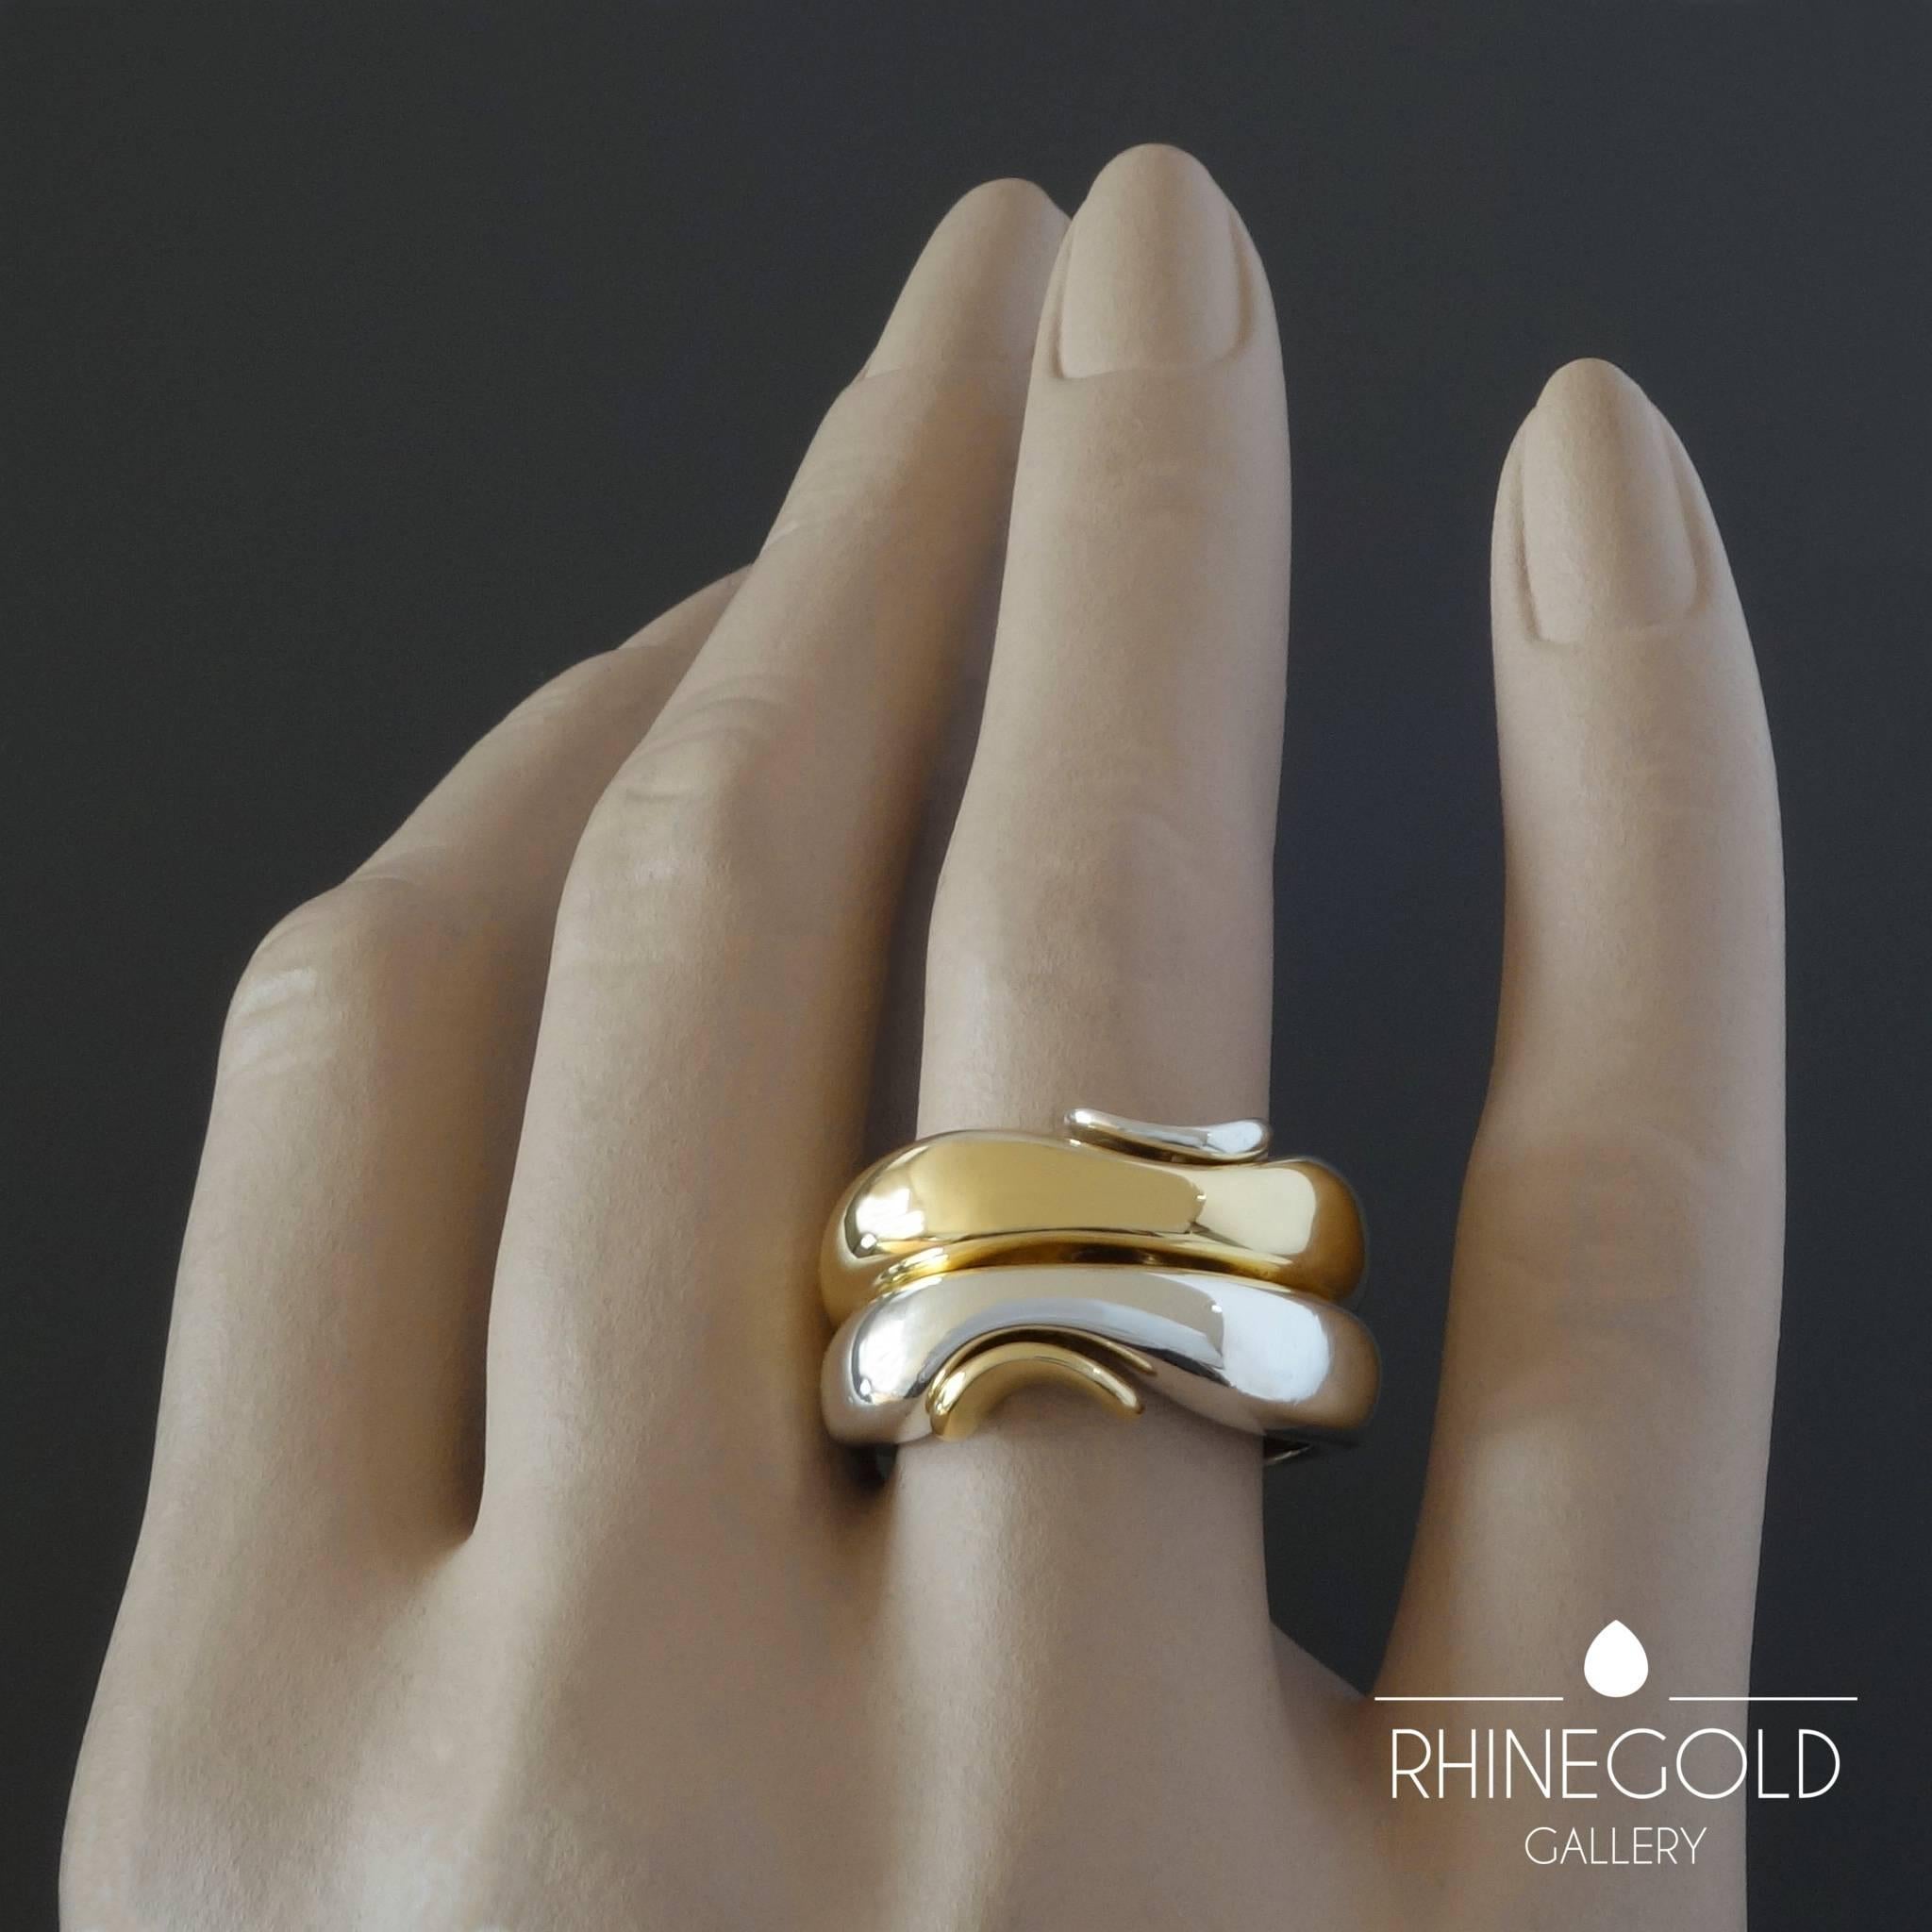 Minas Spiridis for Georg Jensen: Modern Two Piece Gold Silver Ring
18k yellow gold, sterling silver 
max. width of ring head 1.2 cm (approx. 1/2